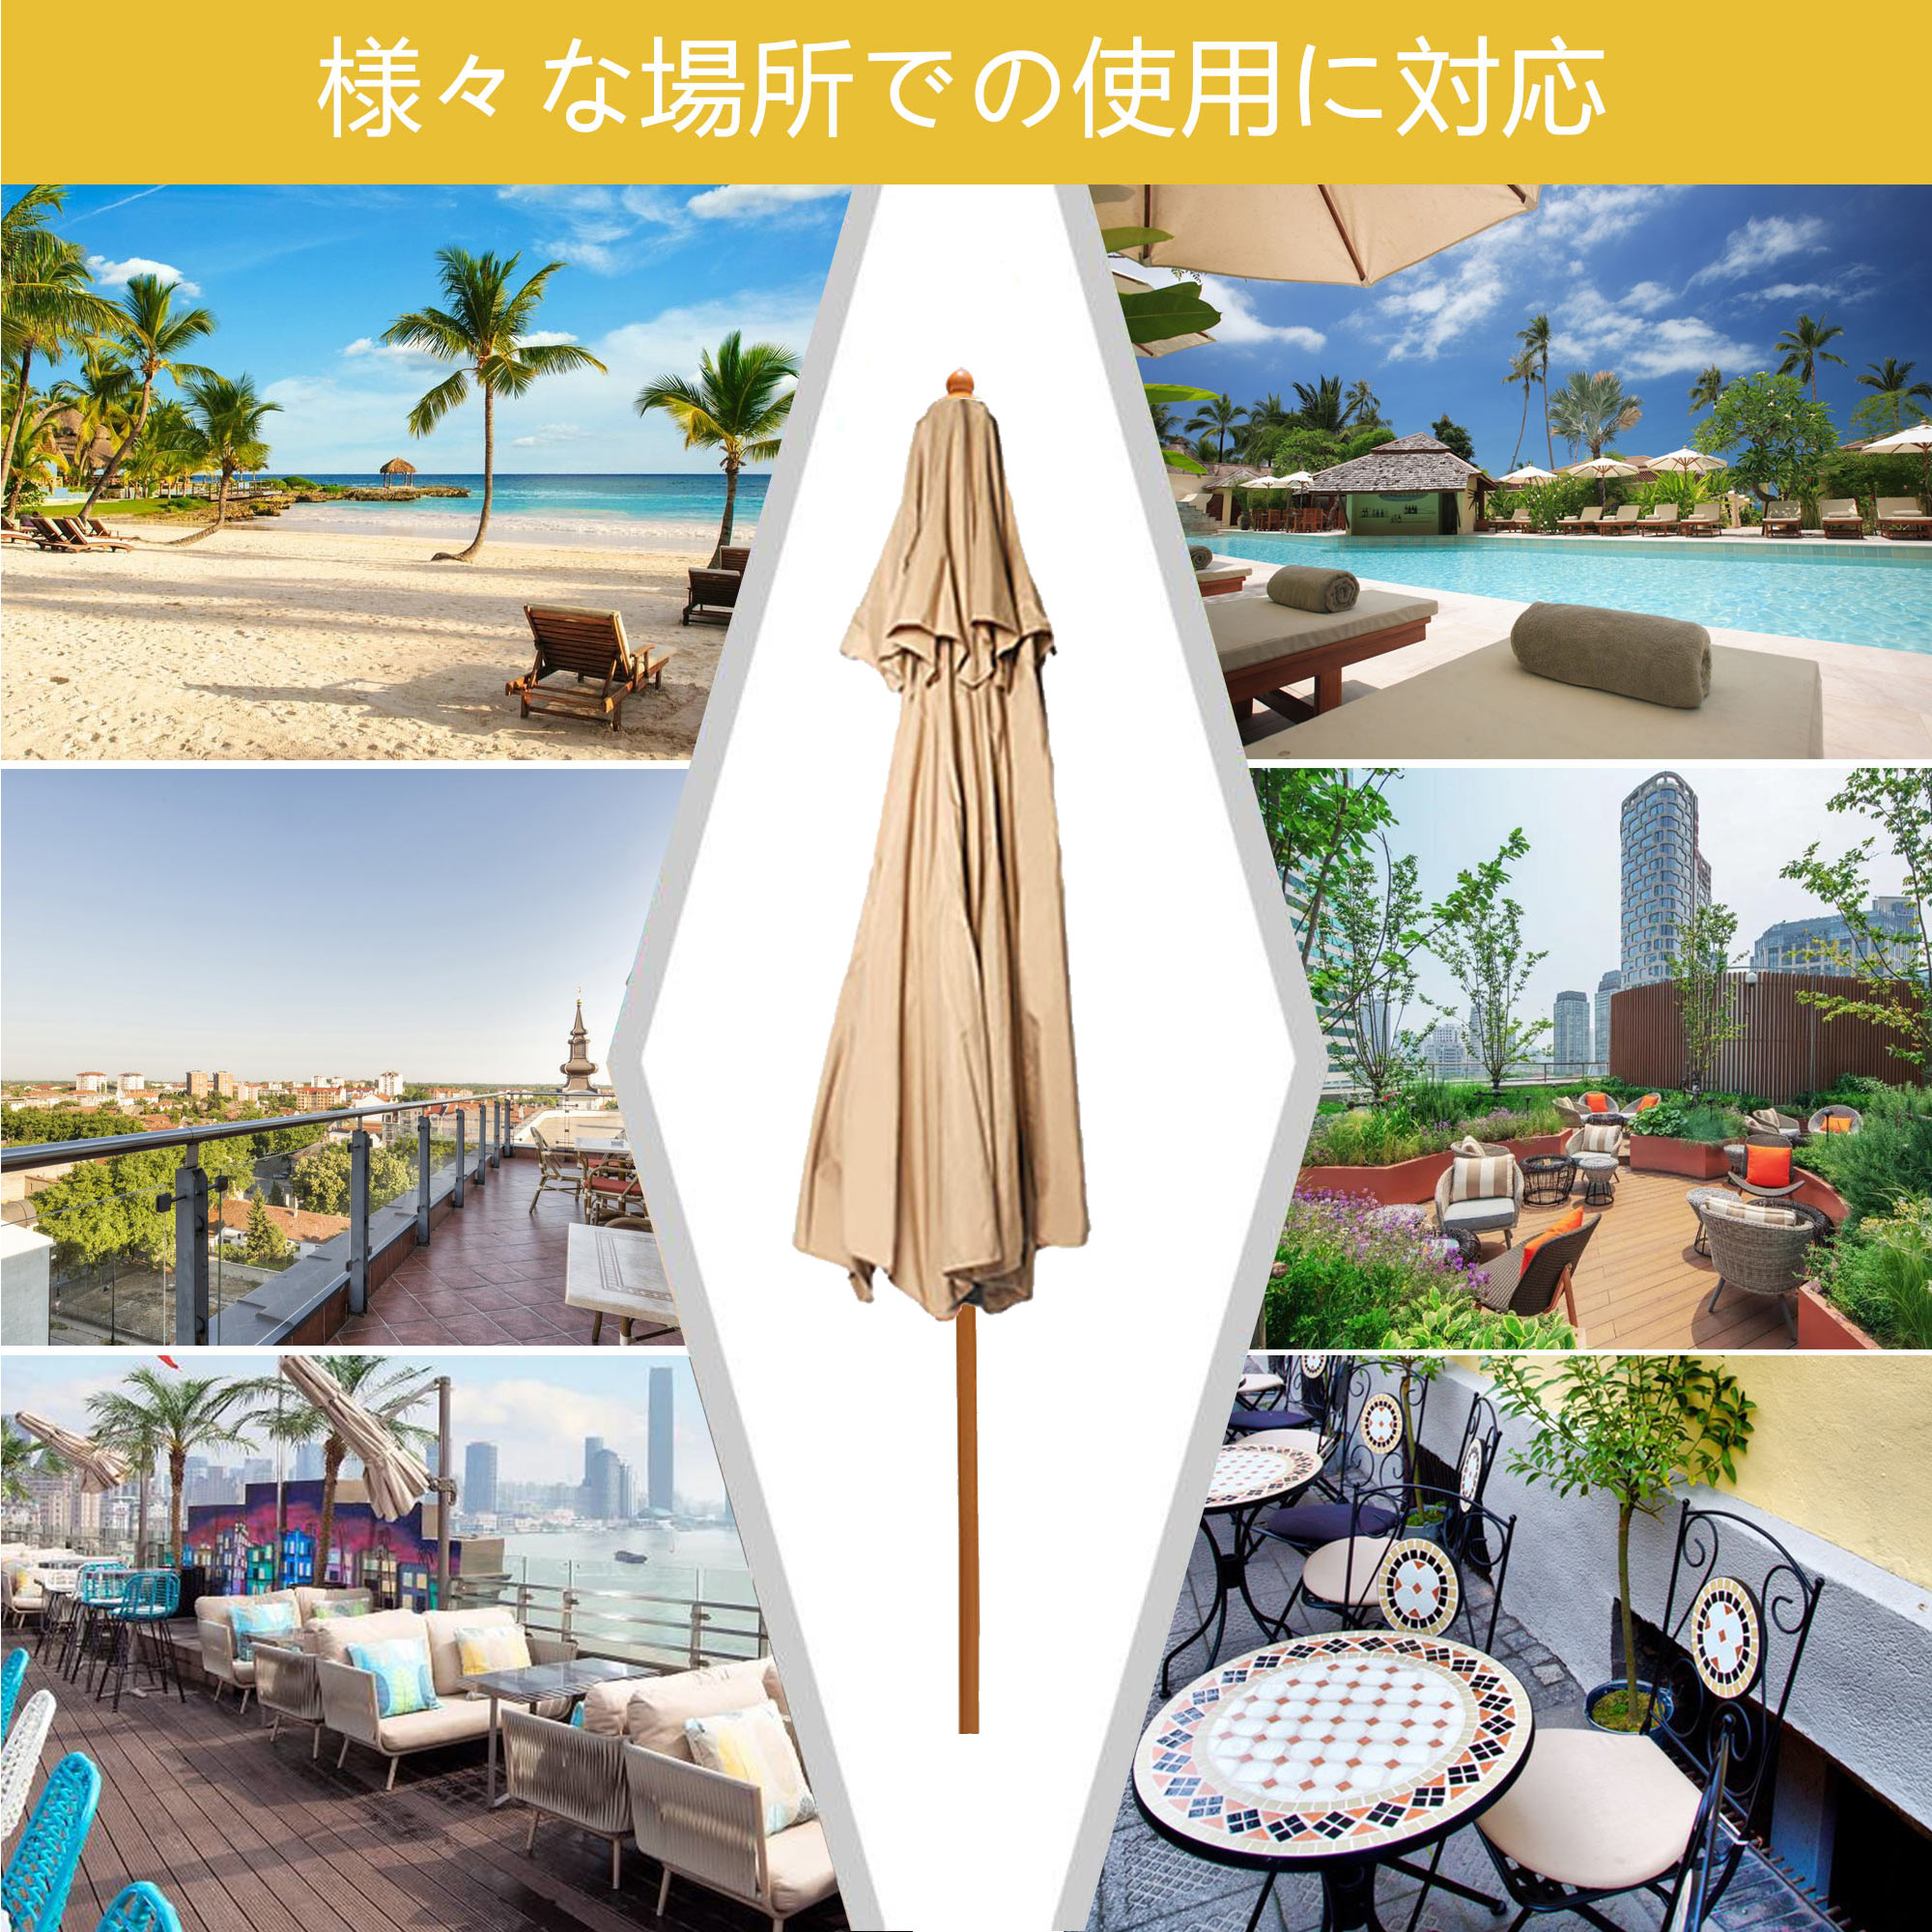  garden parasol parasol large double top manner . strong garden parasol outdoor parasol garden parasol wide parasol UV cut water repelling processing 